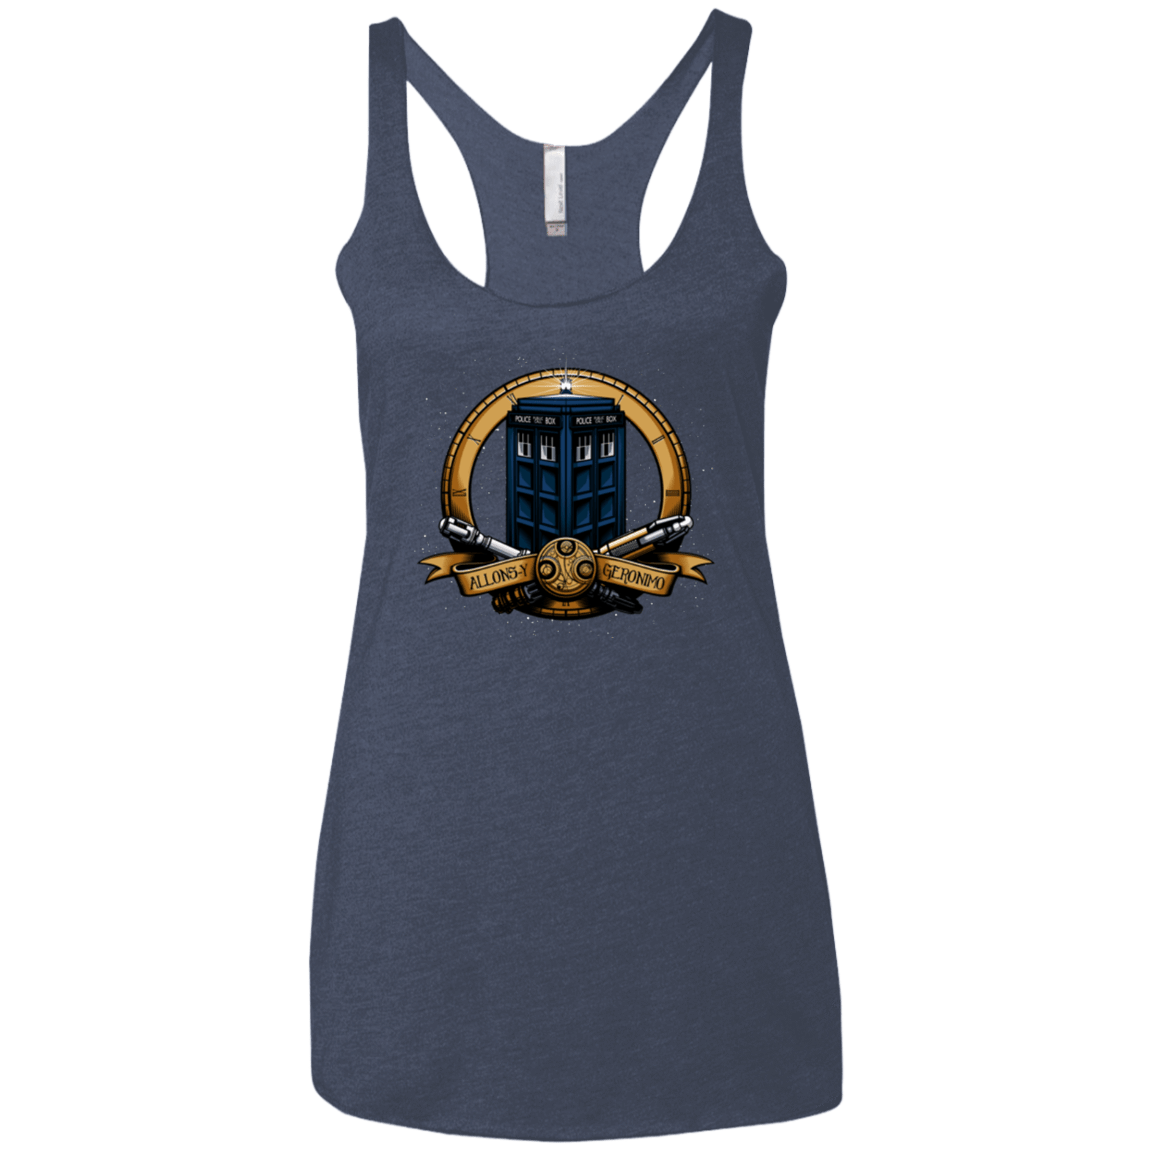 T-Shirts Vintage Navy / X-Small The Day of the Doctor Women's Triblend Racerback Tank